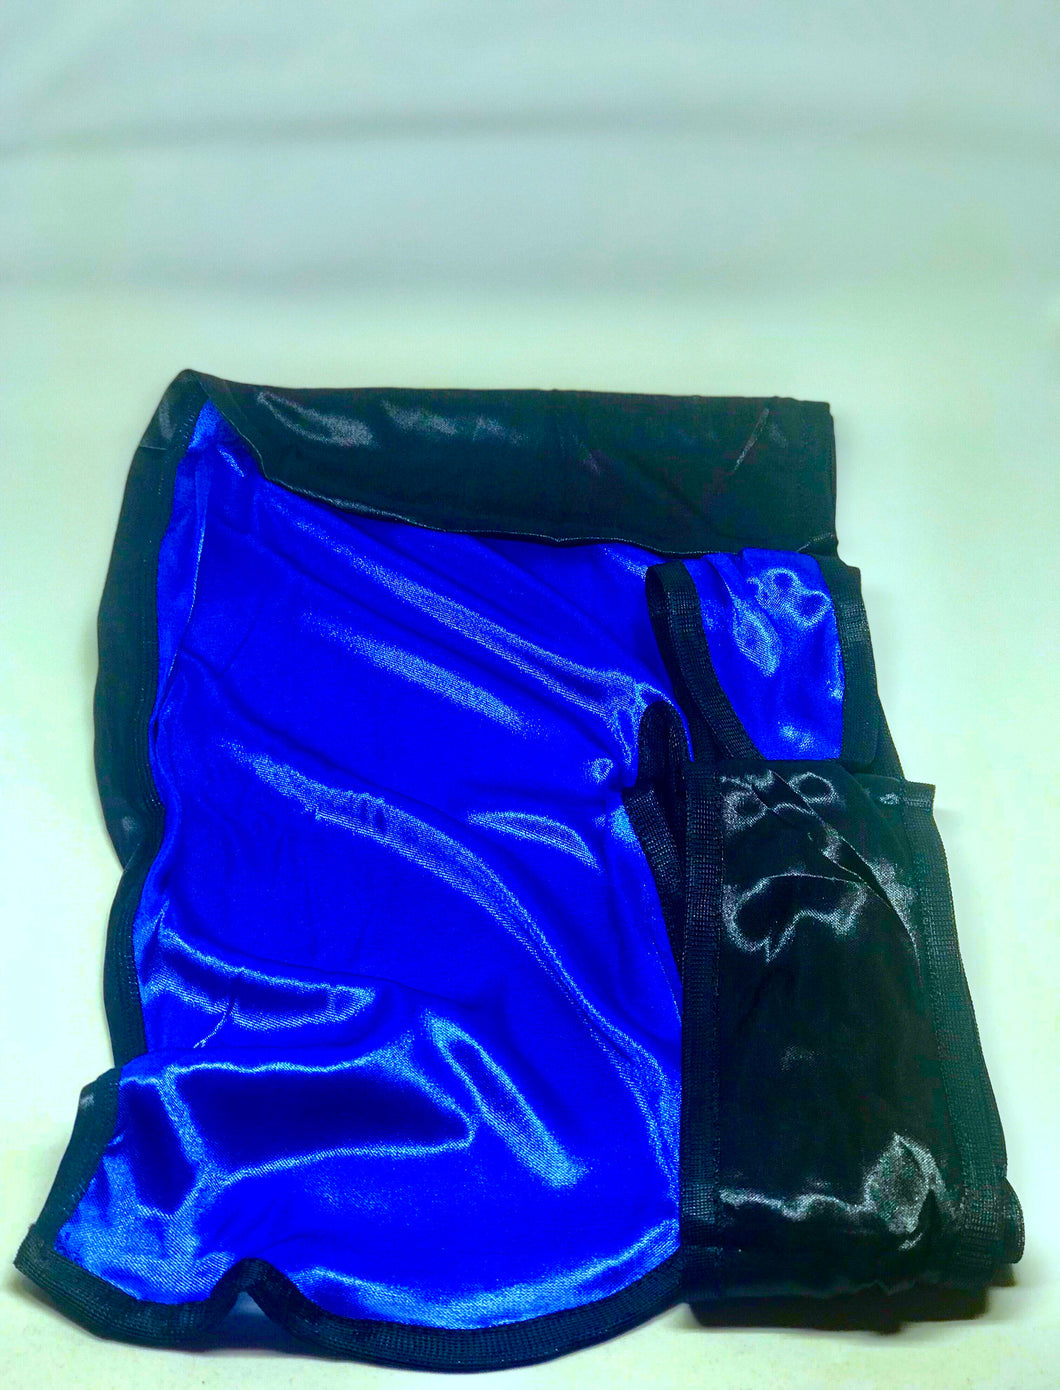 Rimix *PATENT PENDING* Two Tone Silky Durag **Limited Edition** - Black/Blue